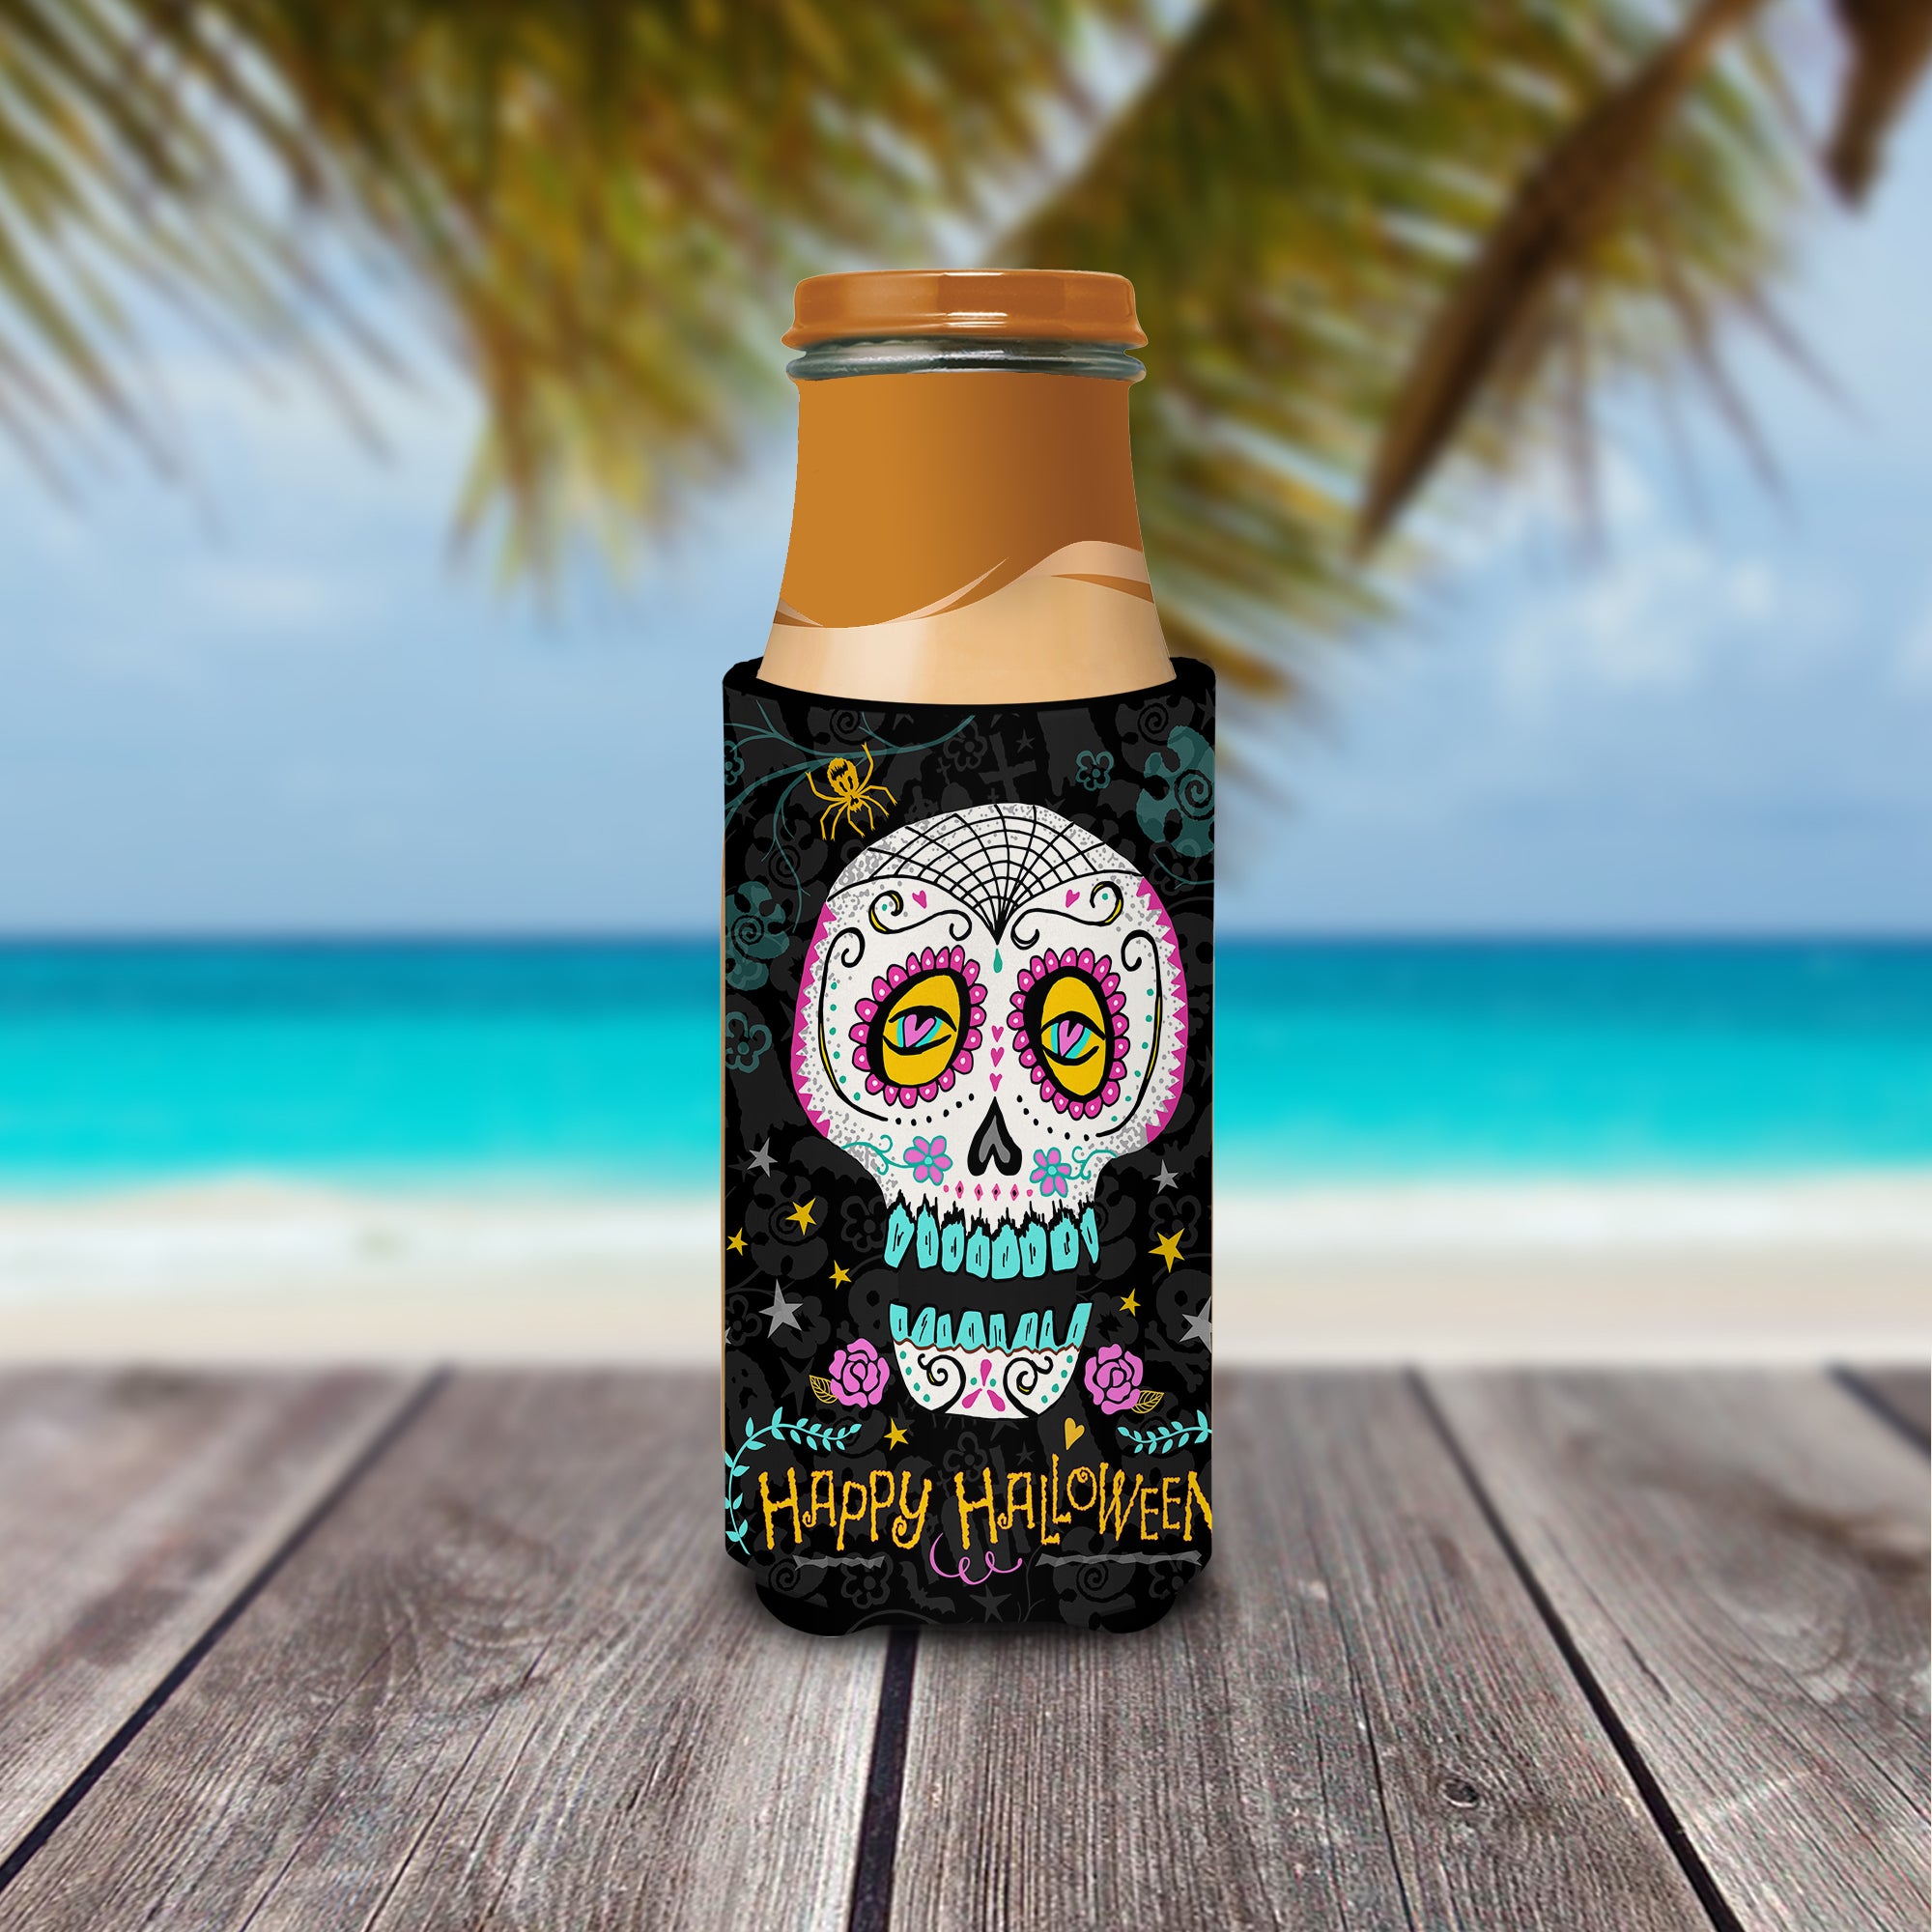 Happy Halloween Day of the Dead  Ultra Hugger for slim cans VHA3035MUK